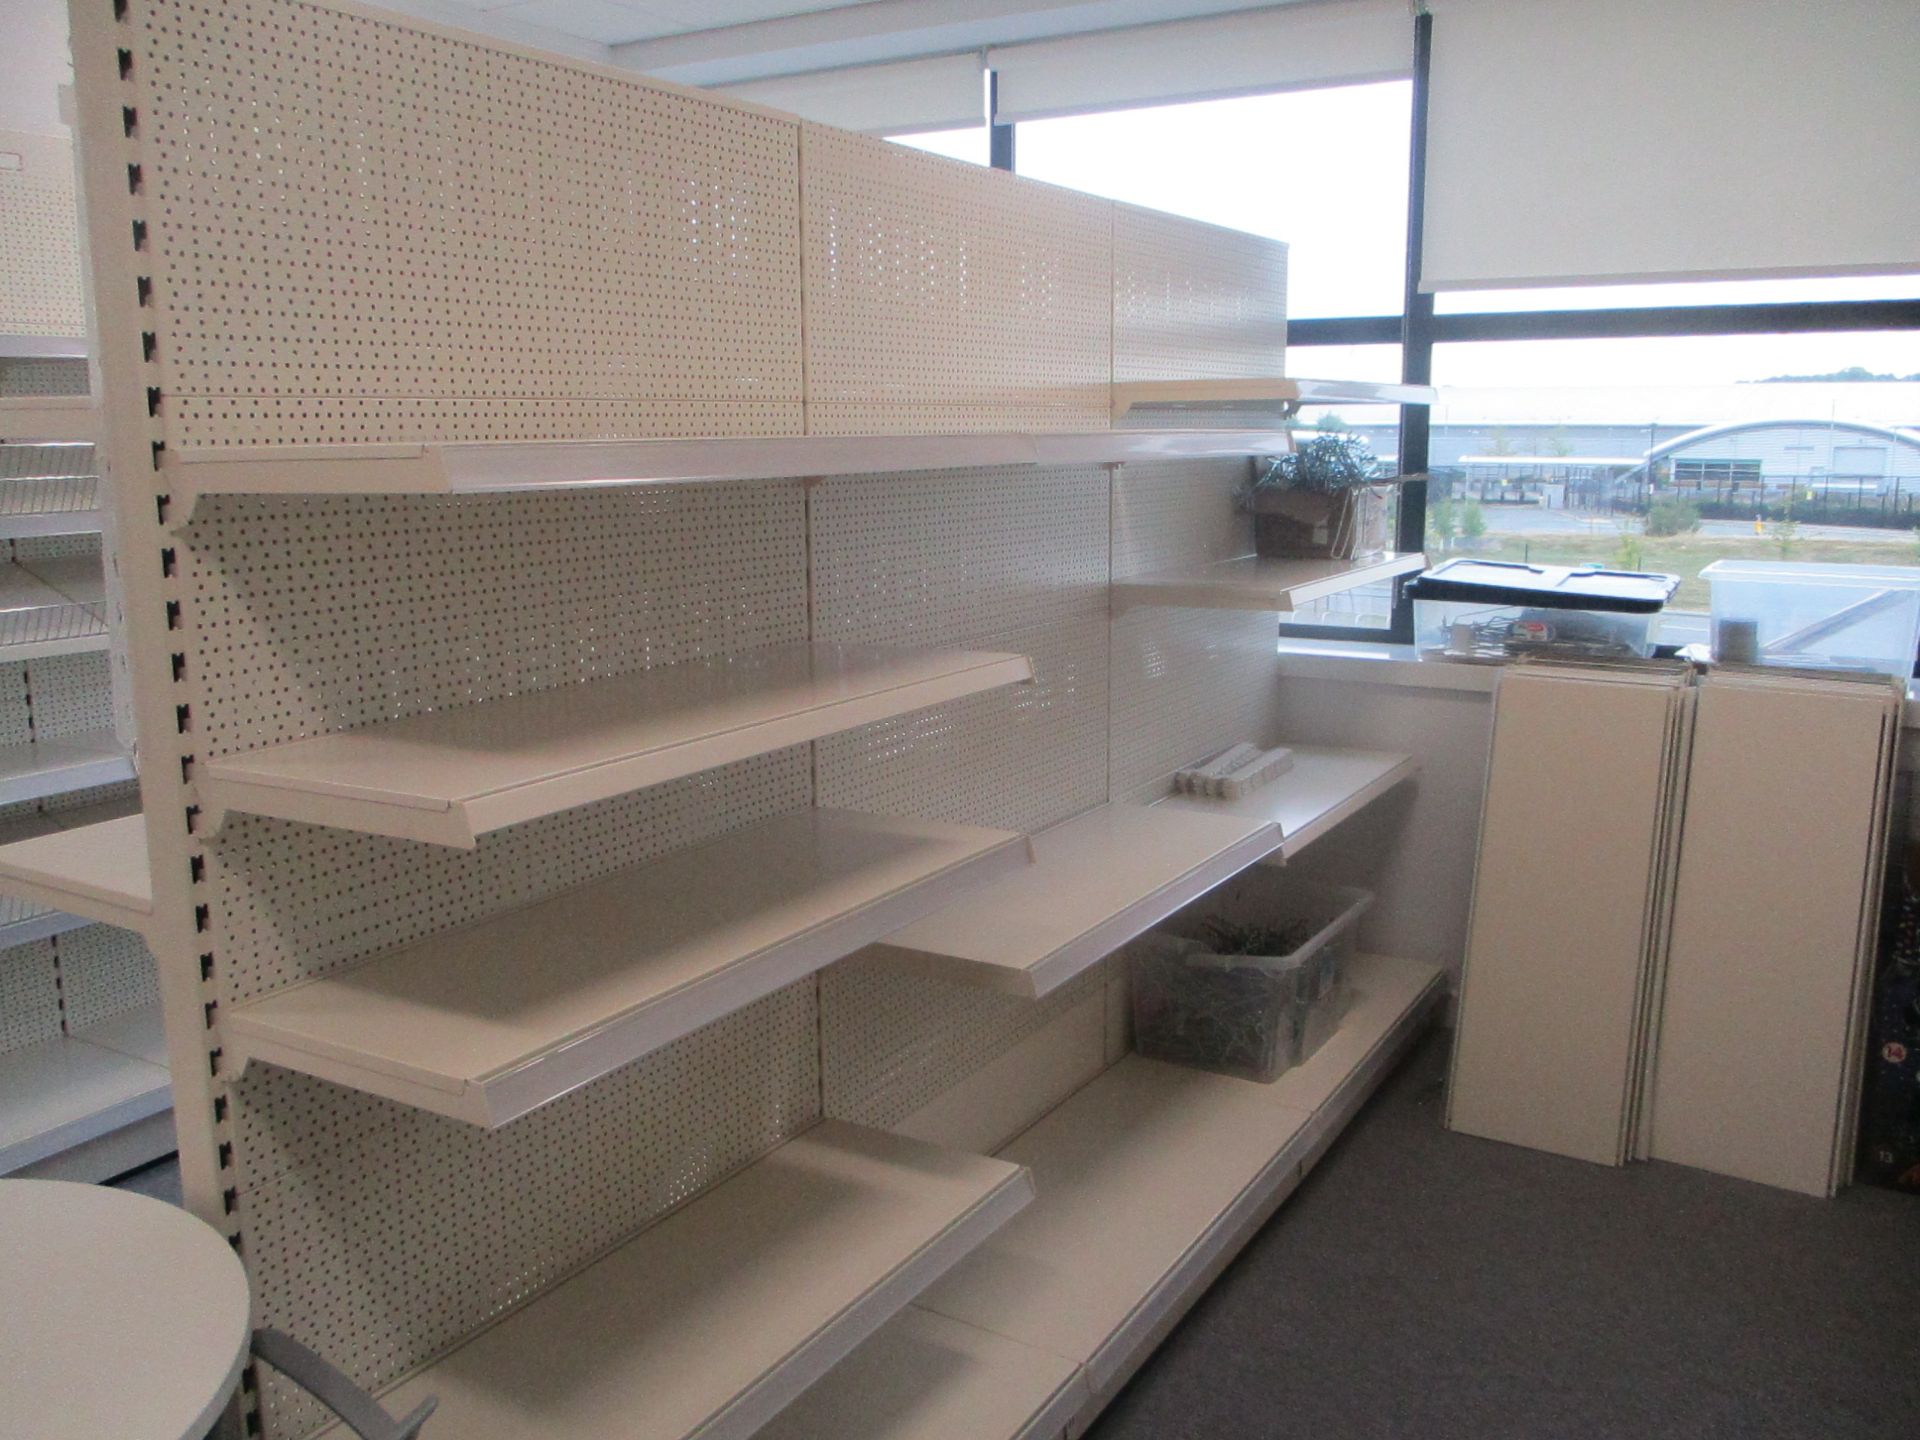 Contents to Room, Quantity of Cantilever Shelving - Image 6 of 6